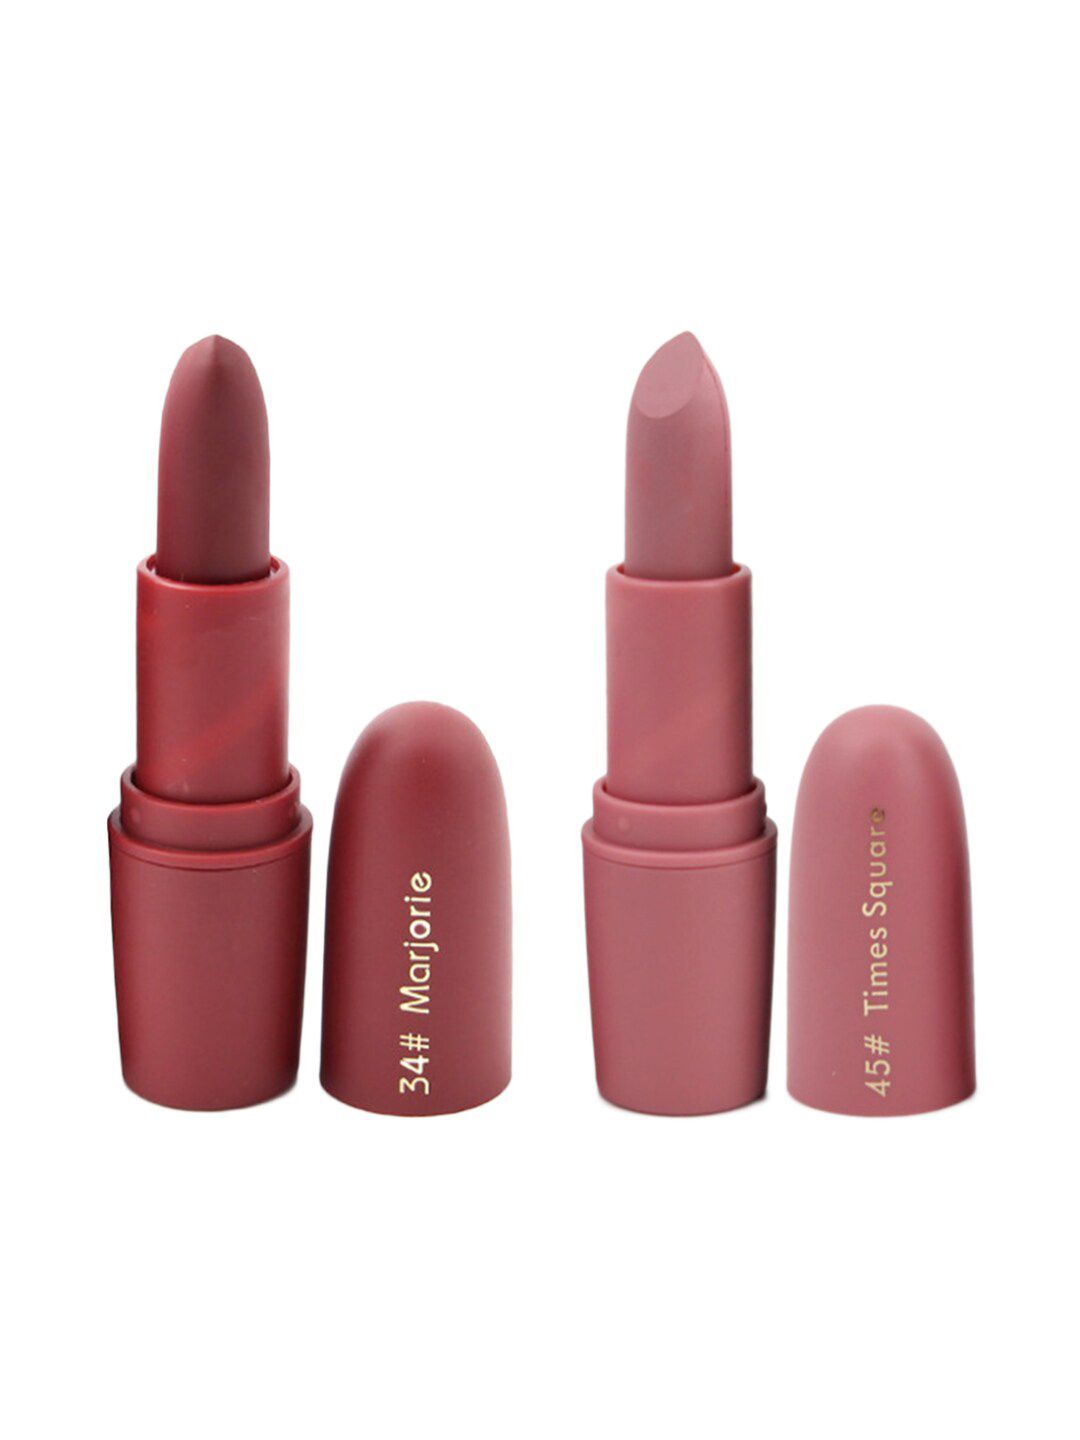 MISS ROSE Professional Make-Up Set of 2 Matte Lipsticks - Marjorie 34 & Times Square 45 Price in India